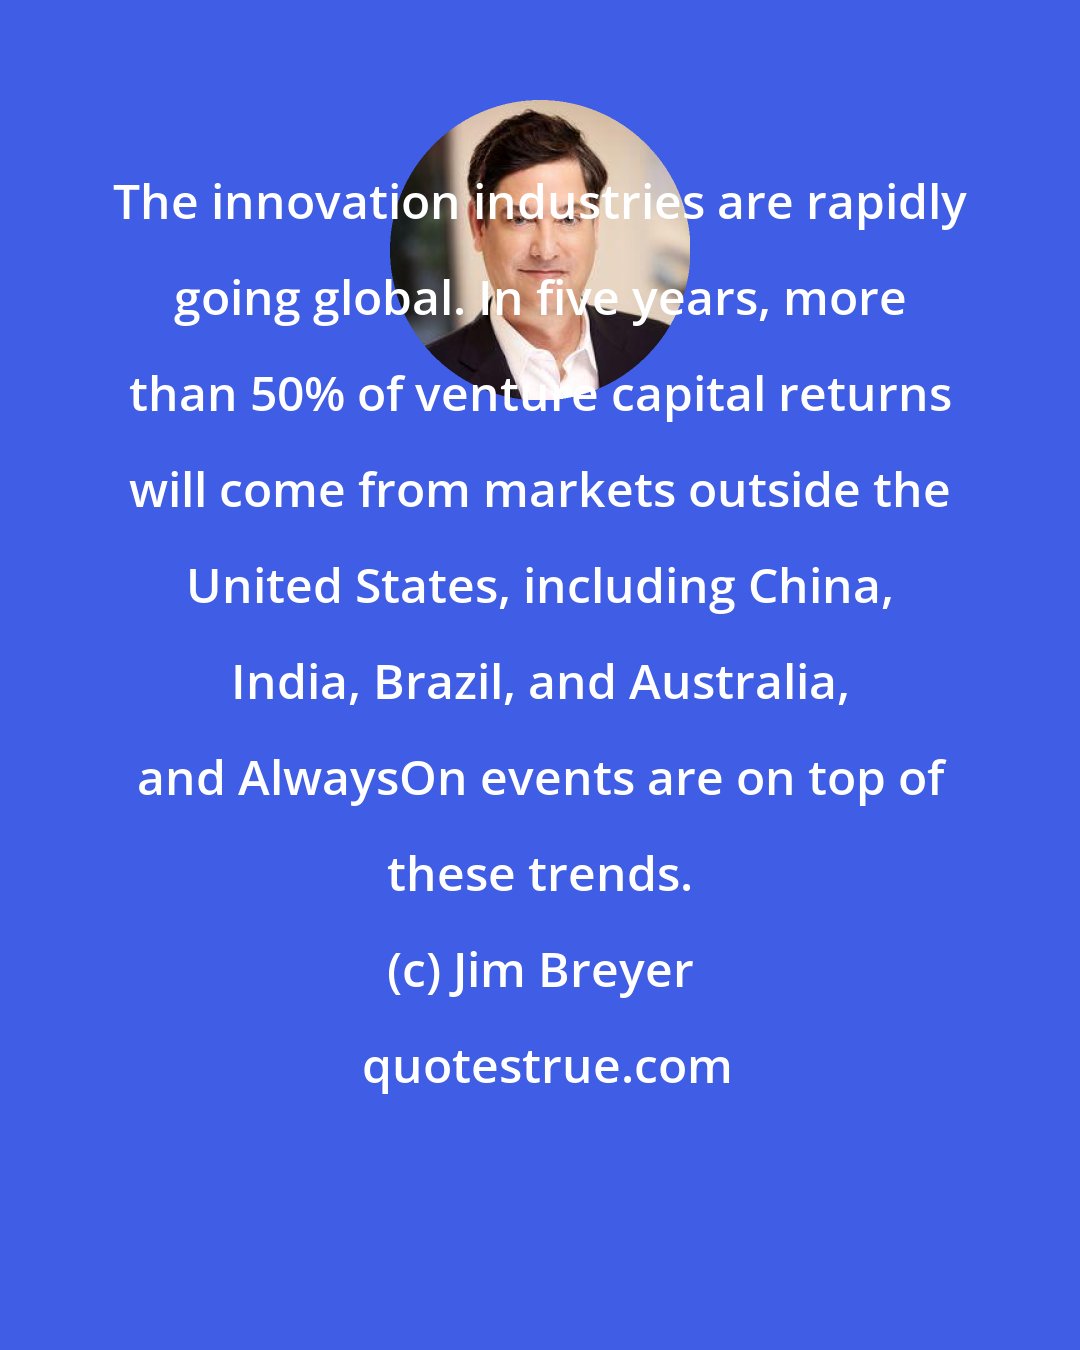 Jim Breyer: The innovation industries are rapidly going global. In five years, more than 50% of venture capital returns will come from markets outside the United States, including China, India, Brazil, and Australia, and AlwaysOn events are on top of these trends.